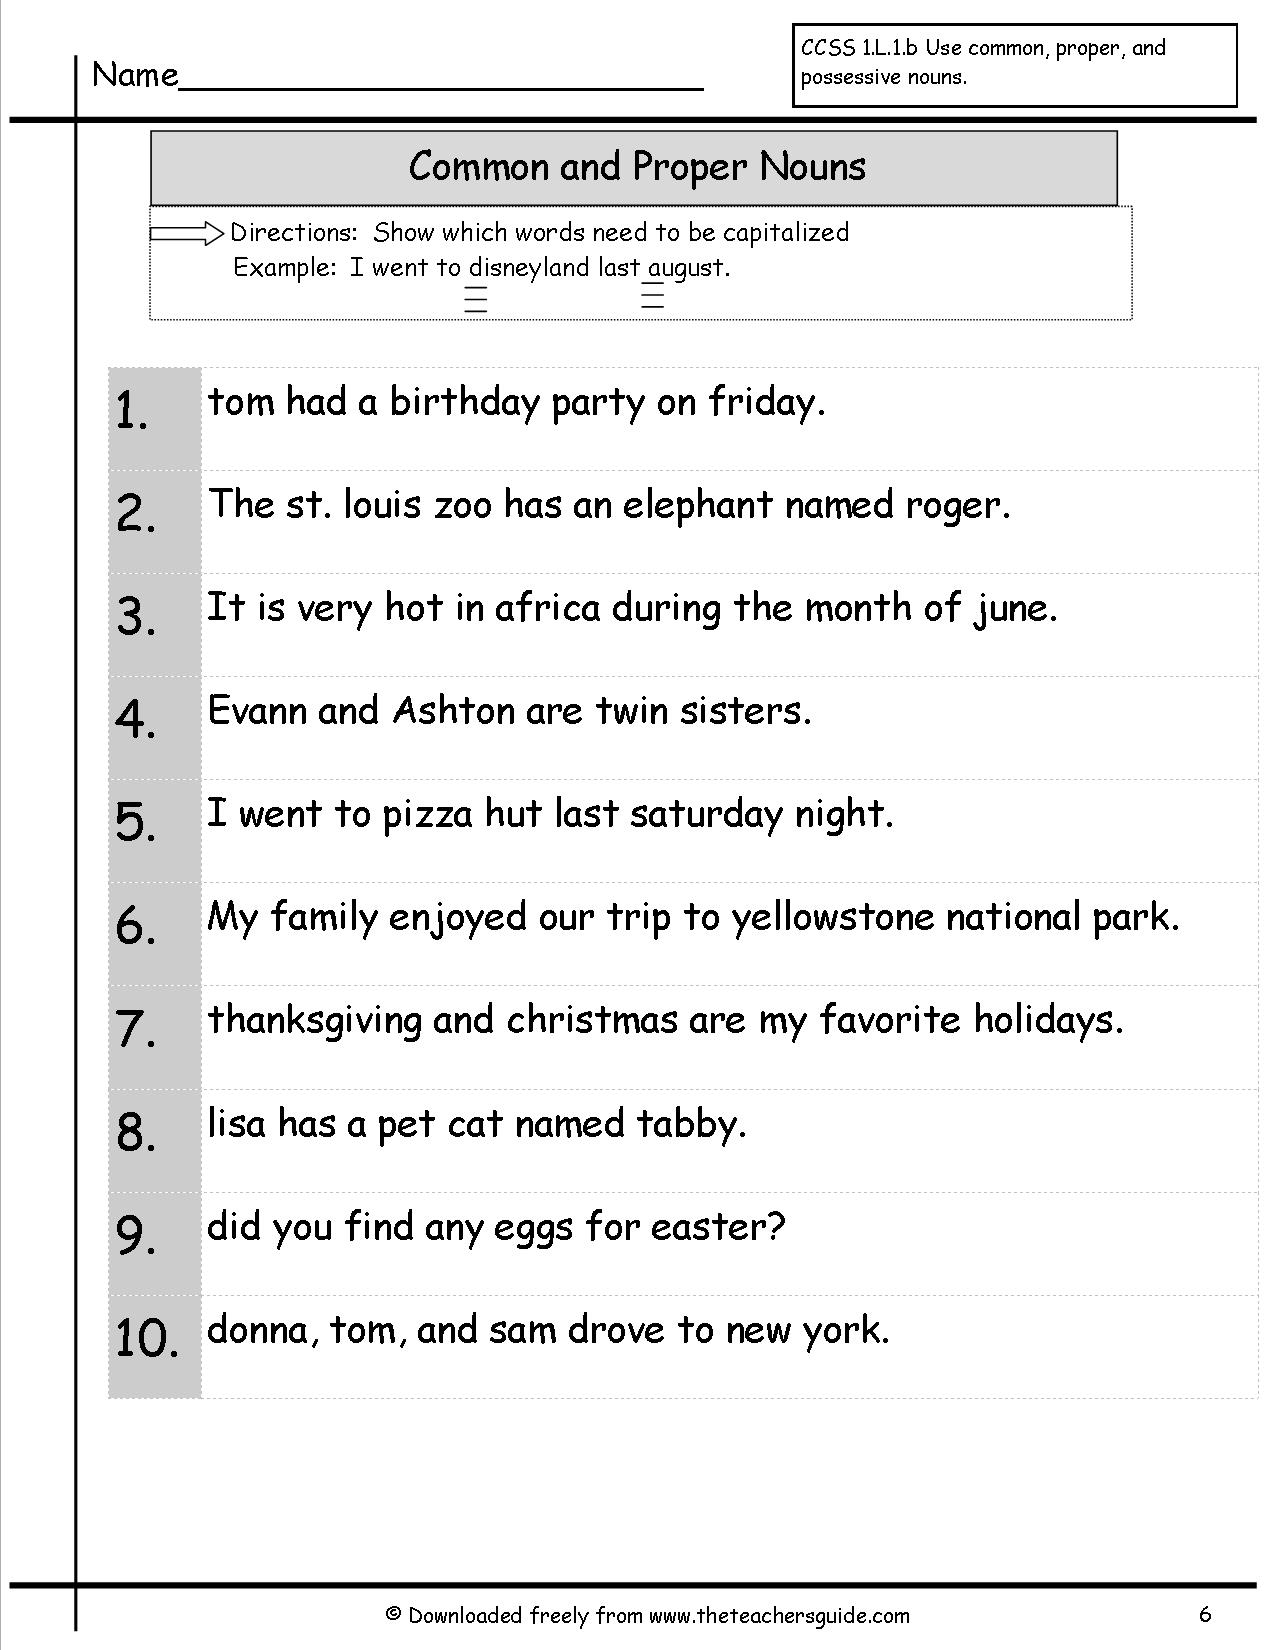 Common and Proper Noun Worksheet First Grade Image